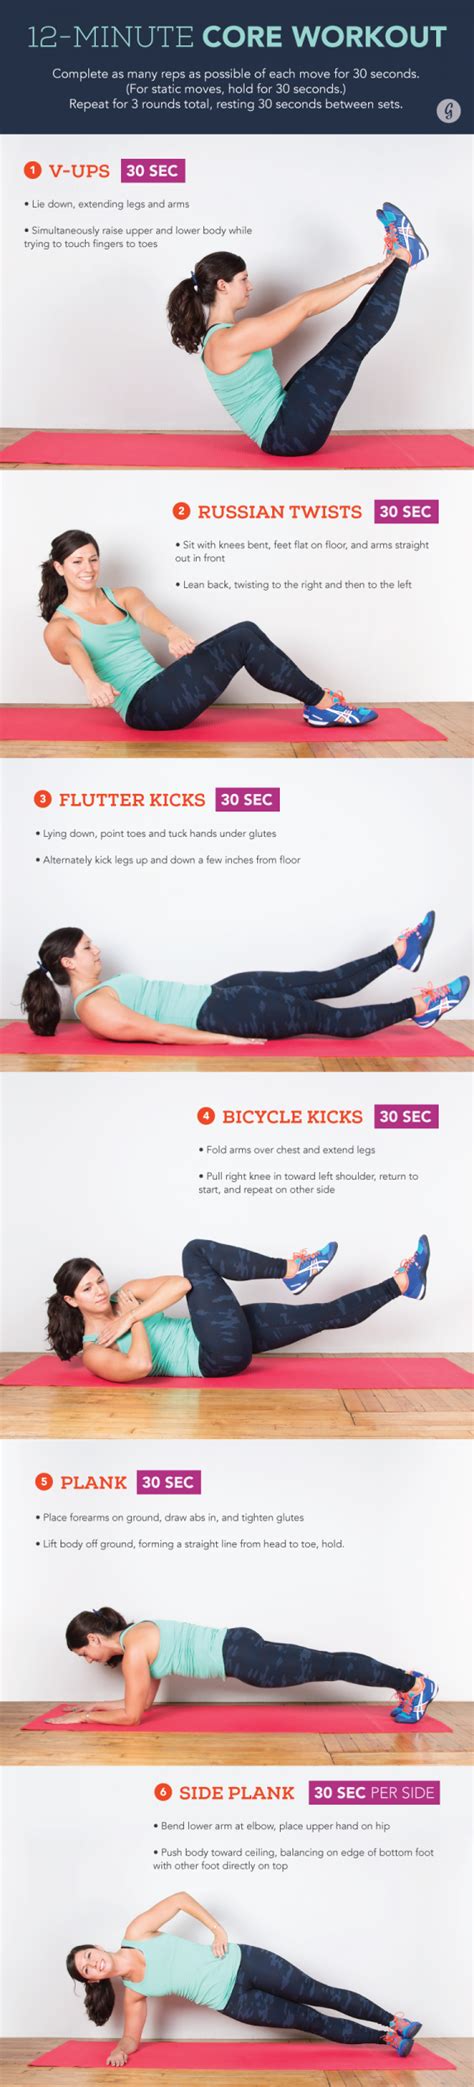 core exercises    bodyweight moves greatist